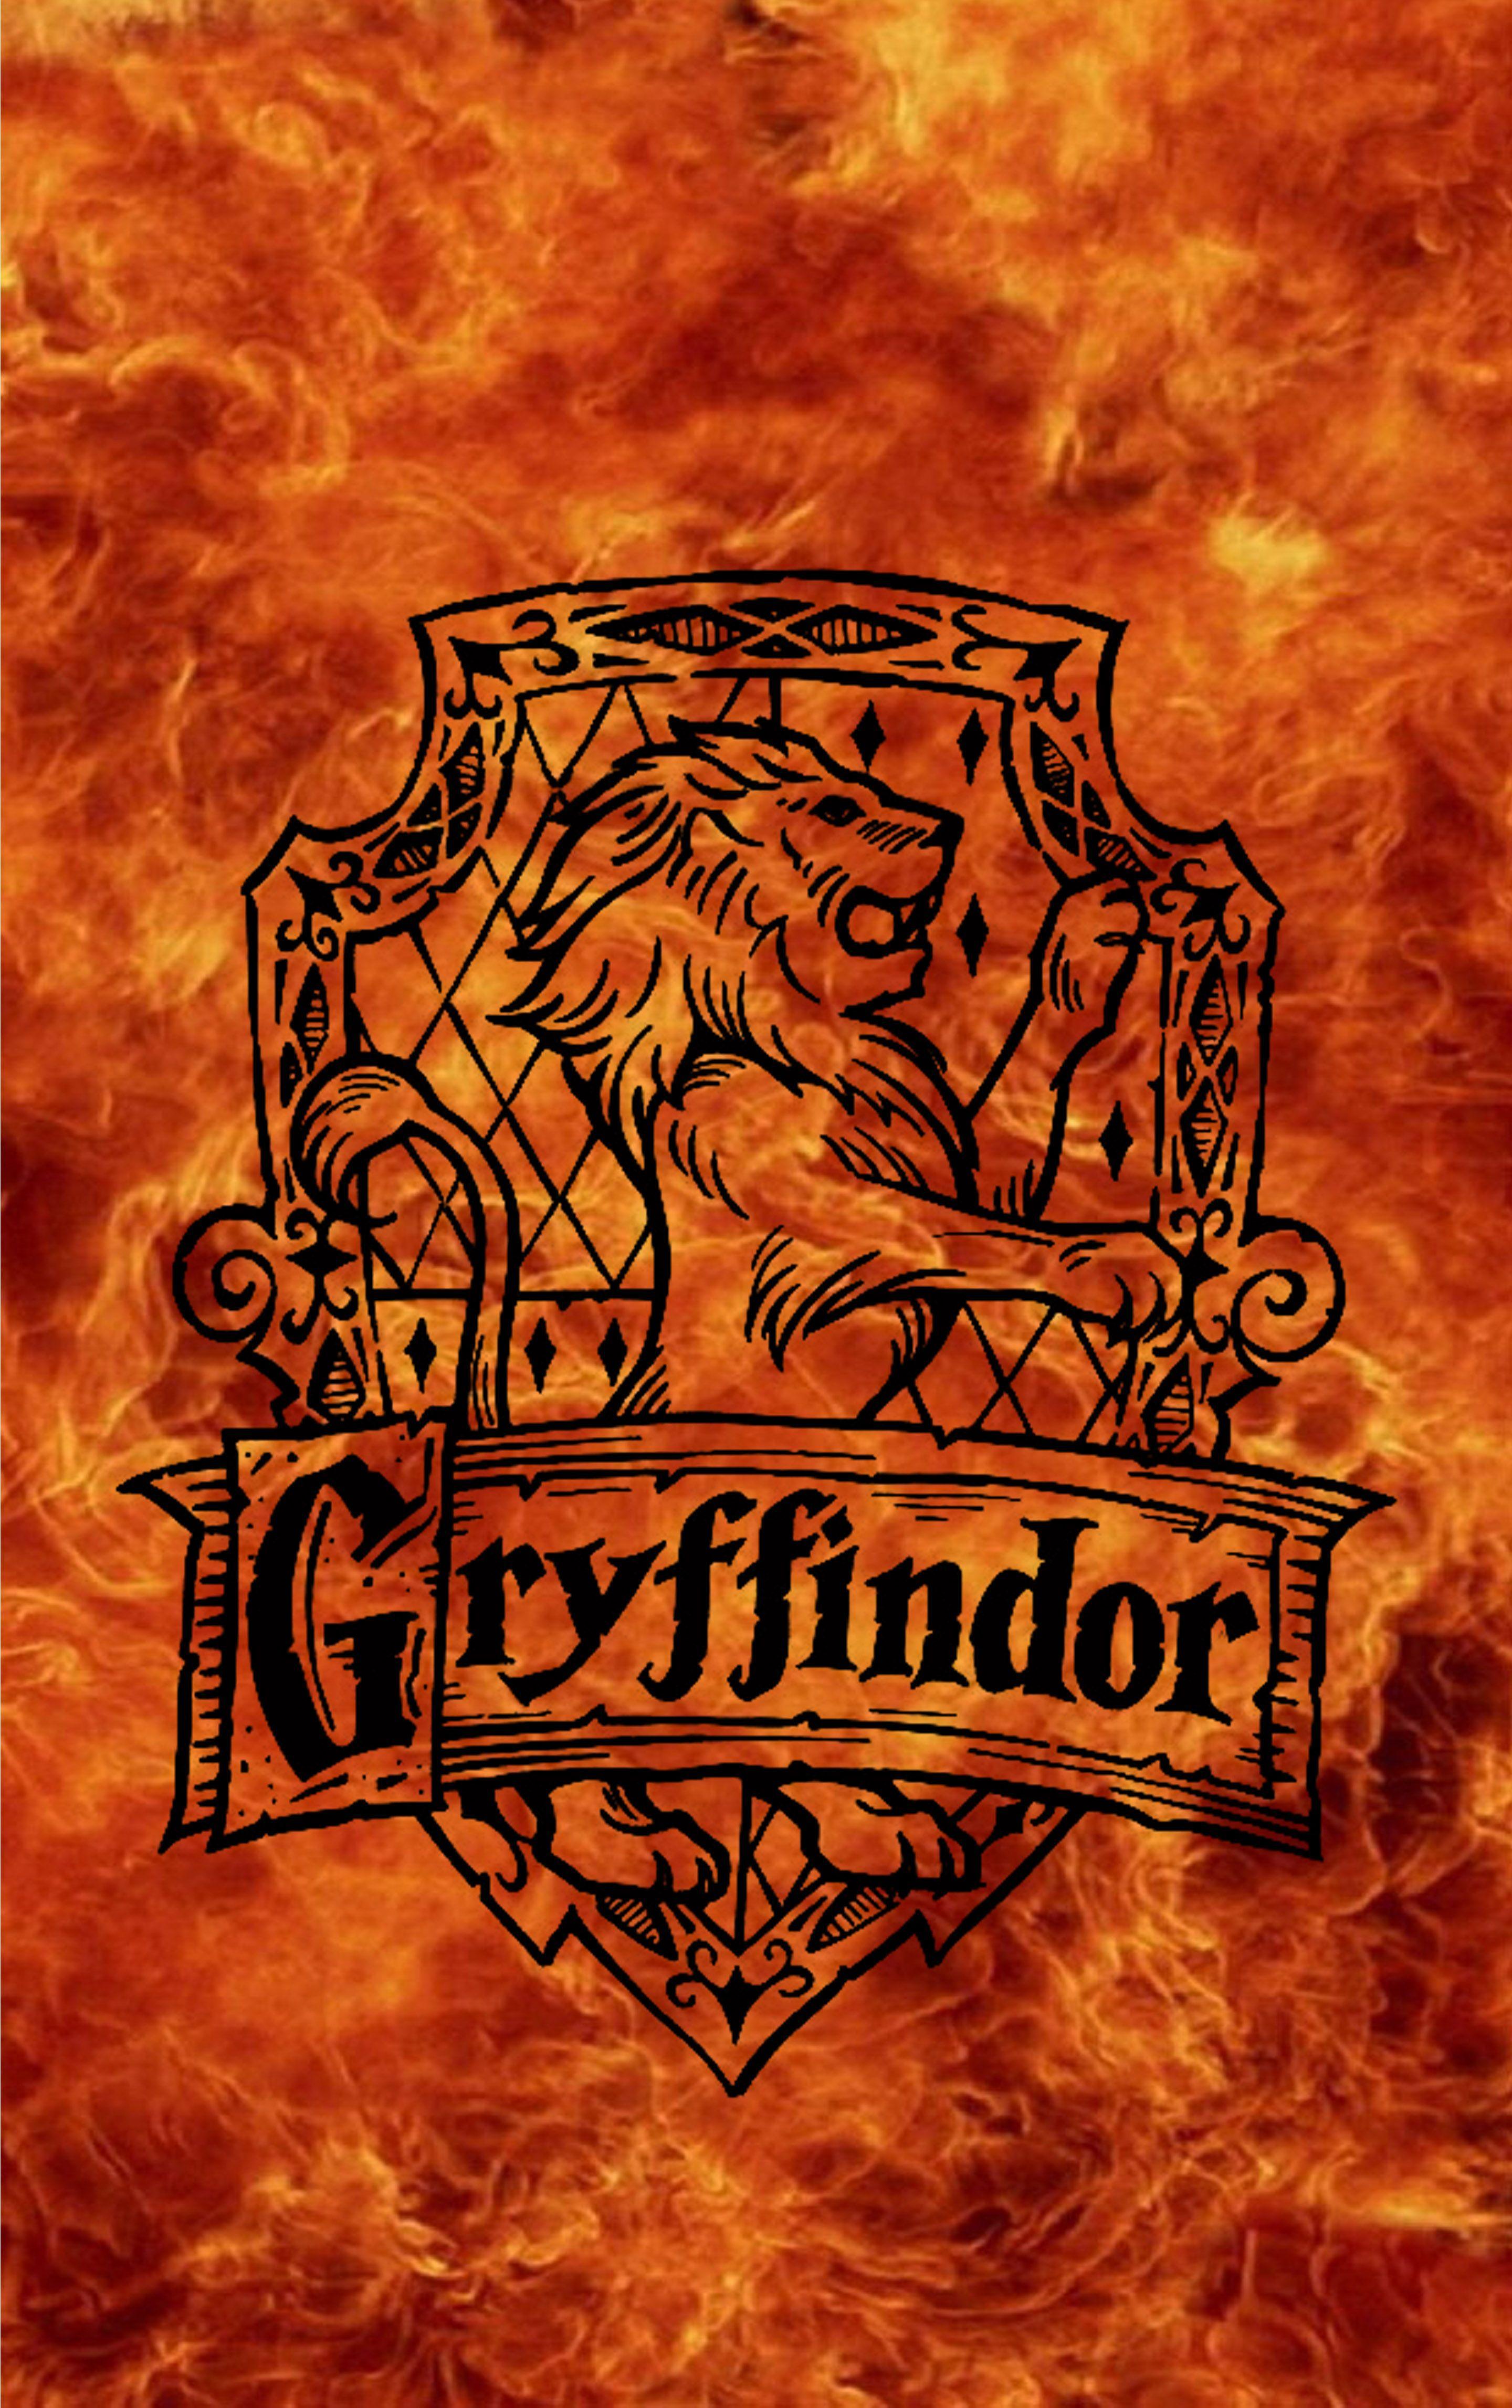 1080x1920 Download Gryffindor 1080 x 1920 Wallpapers  4669592  harry  potter   Harry potter Harry potter filmleri Iphone